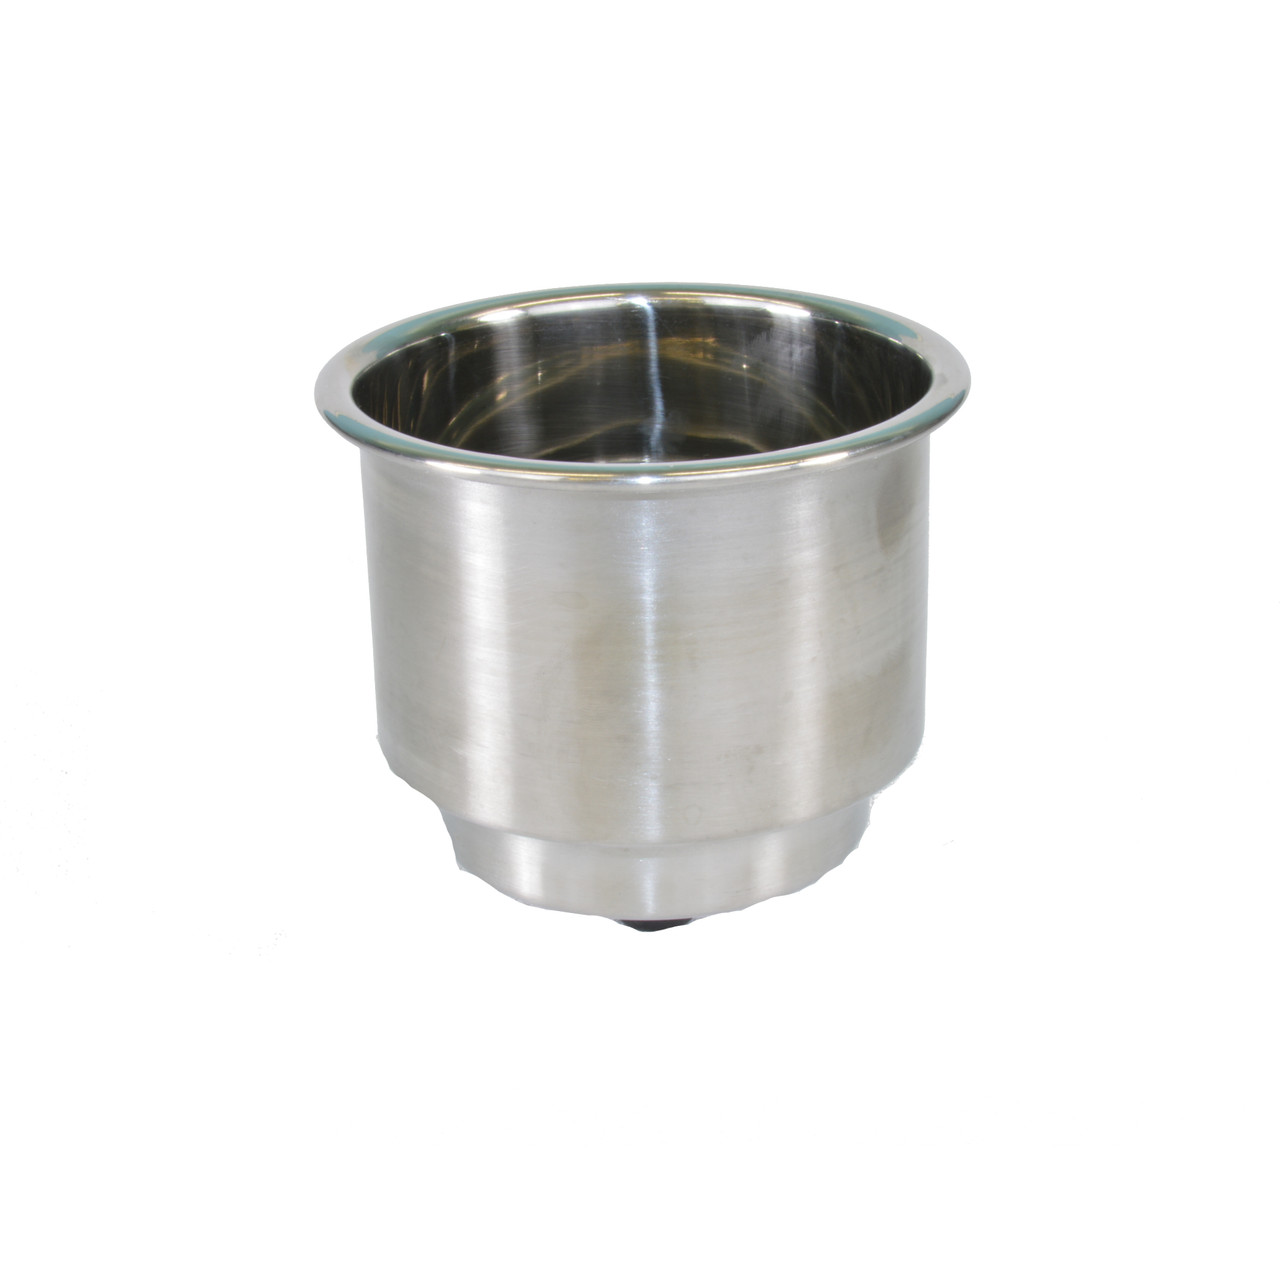 cup holder - stainless steel